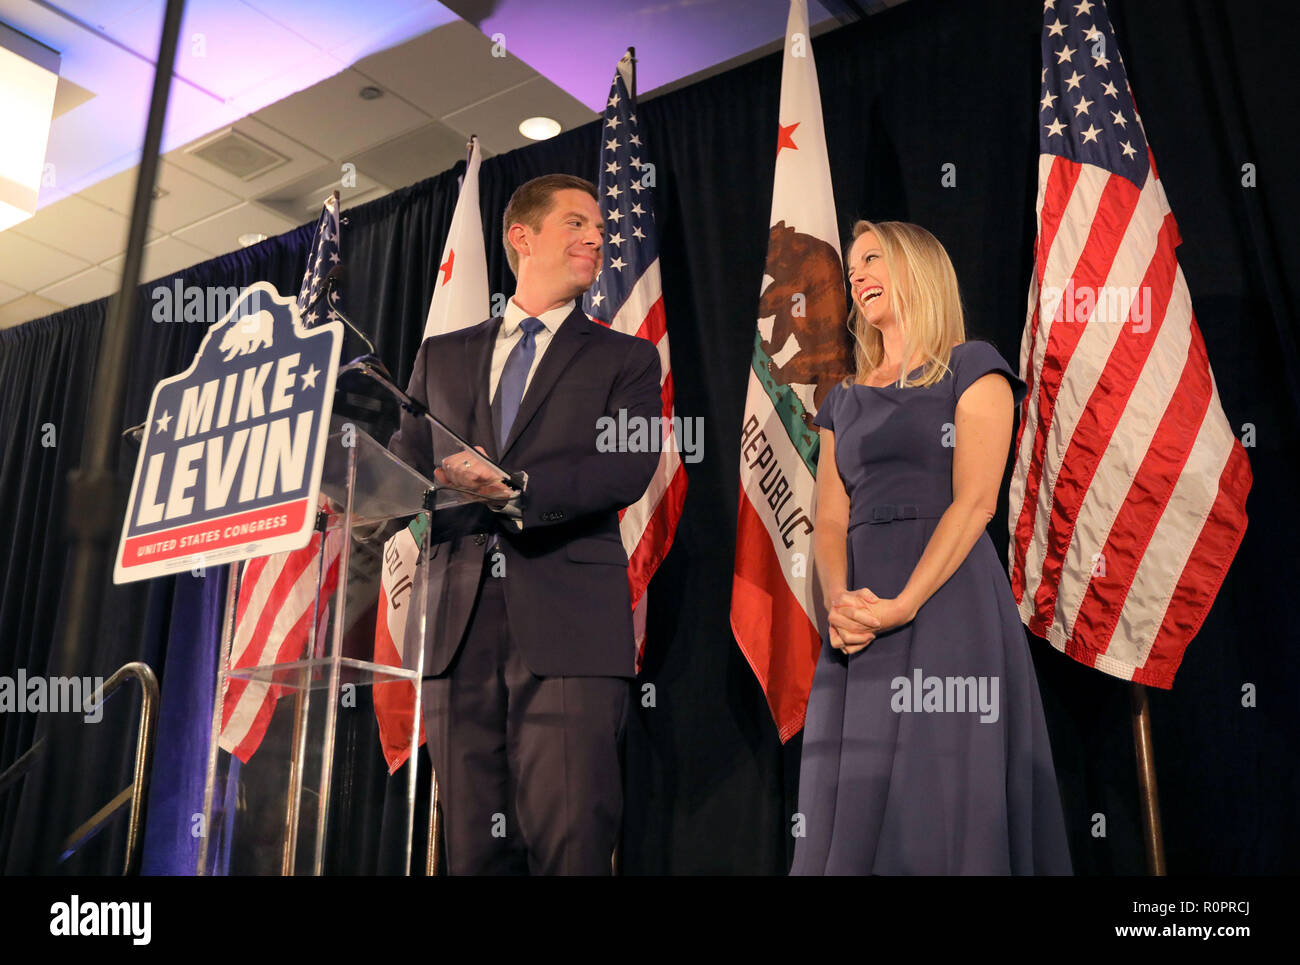 Del Mar, California, USA. 7th Nov, 2018. November 6, 2018 Del Mar, California | Congressional candidate Mike Levin looks to his wife Chrissy as he speaks at his victory rally at the Hilton Hotel in Del Mar, CA.  | Photo Credit: Photo by Charlie Neuman Credit: Charlie Neuman/ZUMA Wire/Alamy Live News Stock Photo